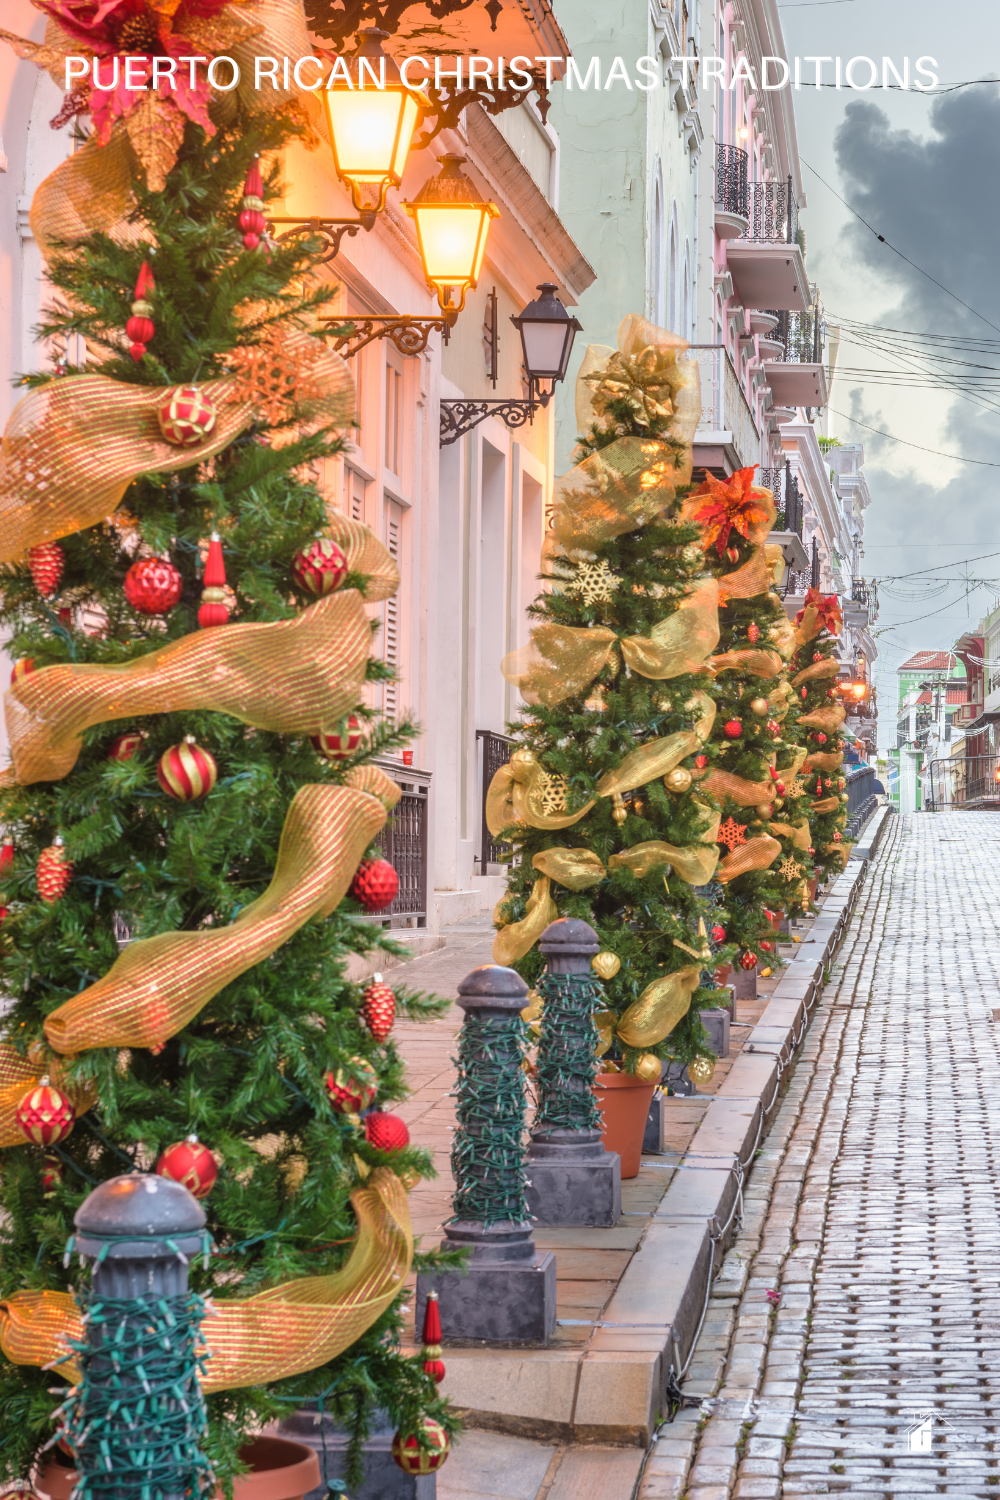 Are you looking for some fun and new Christmas traditions? Check out these 6 Puerto Rican Christmas traditions you can do this year! via @mystayathome